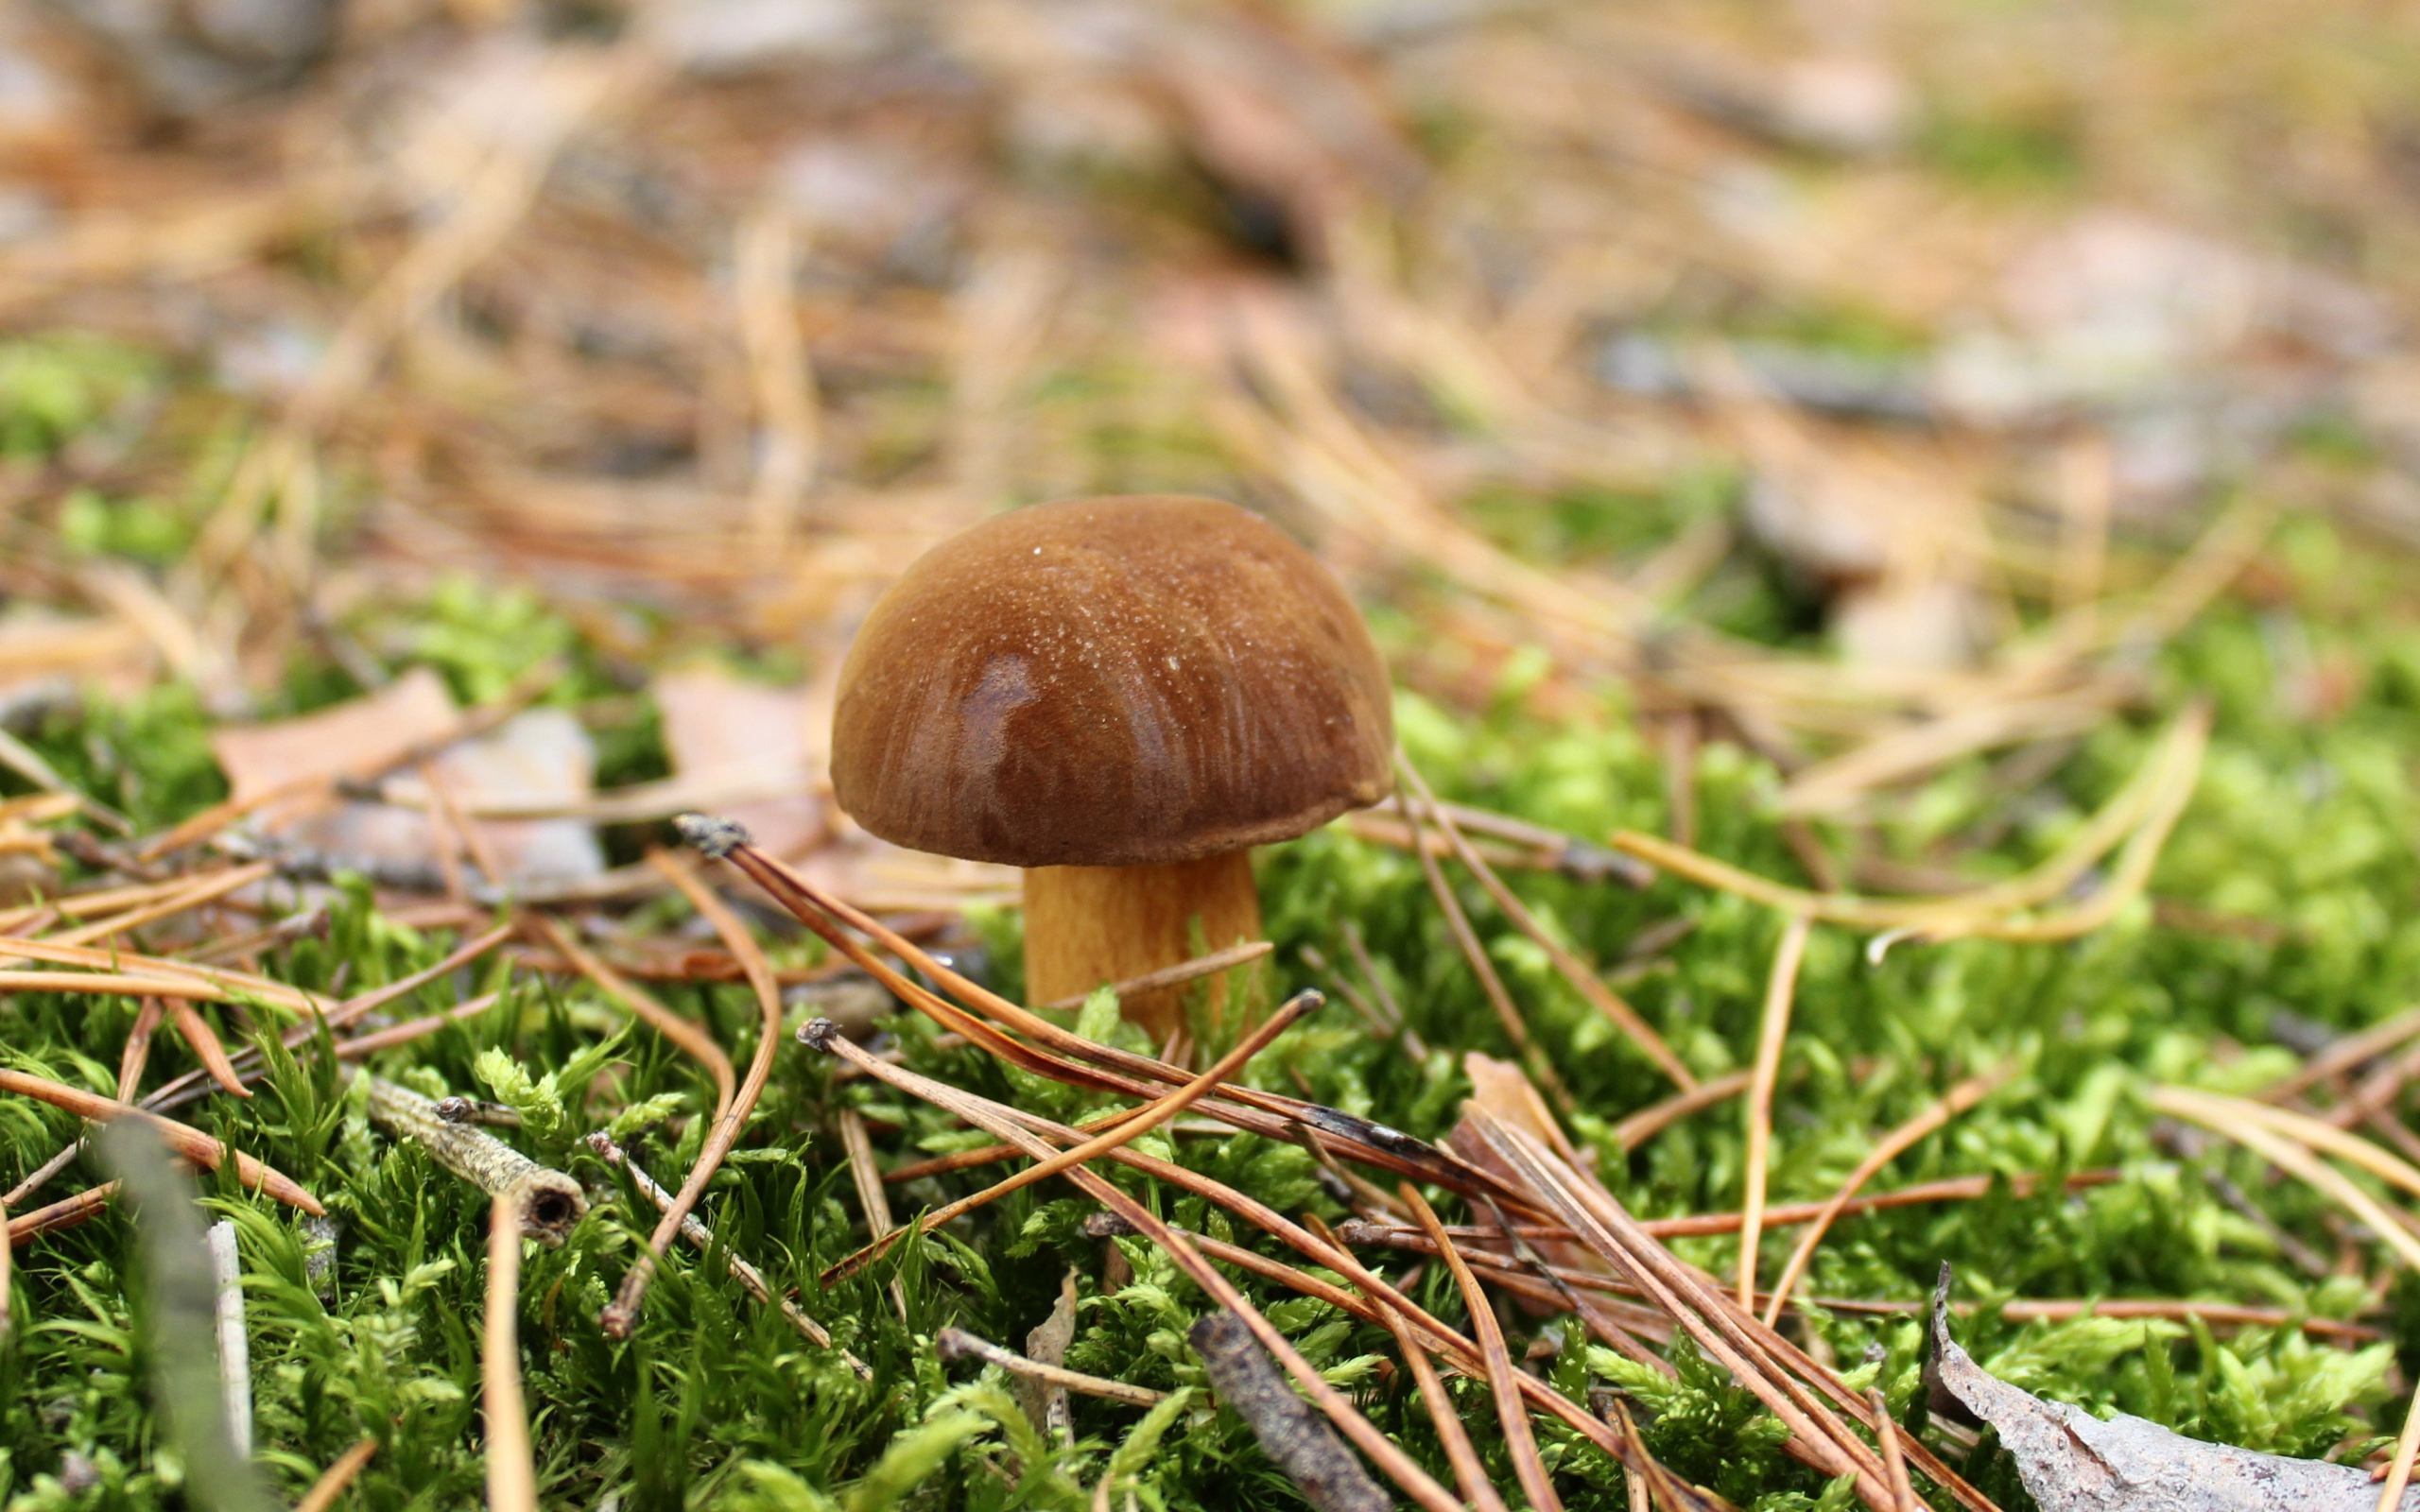 Mushroom grows on grass covered with green moss.